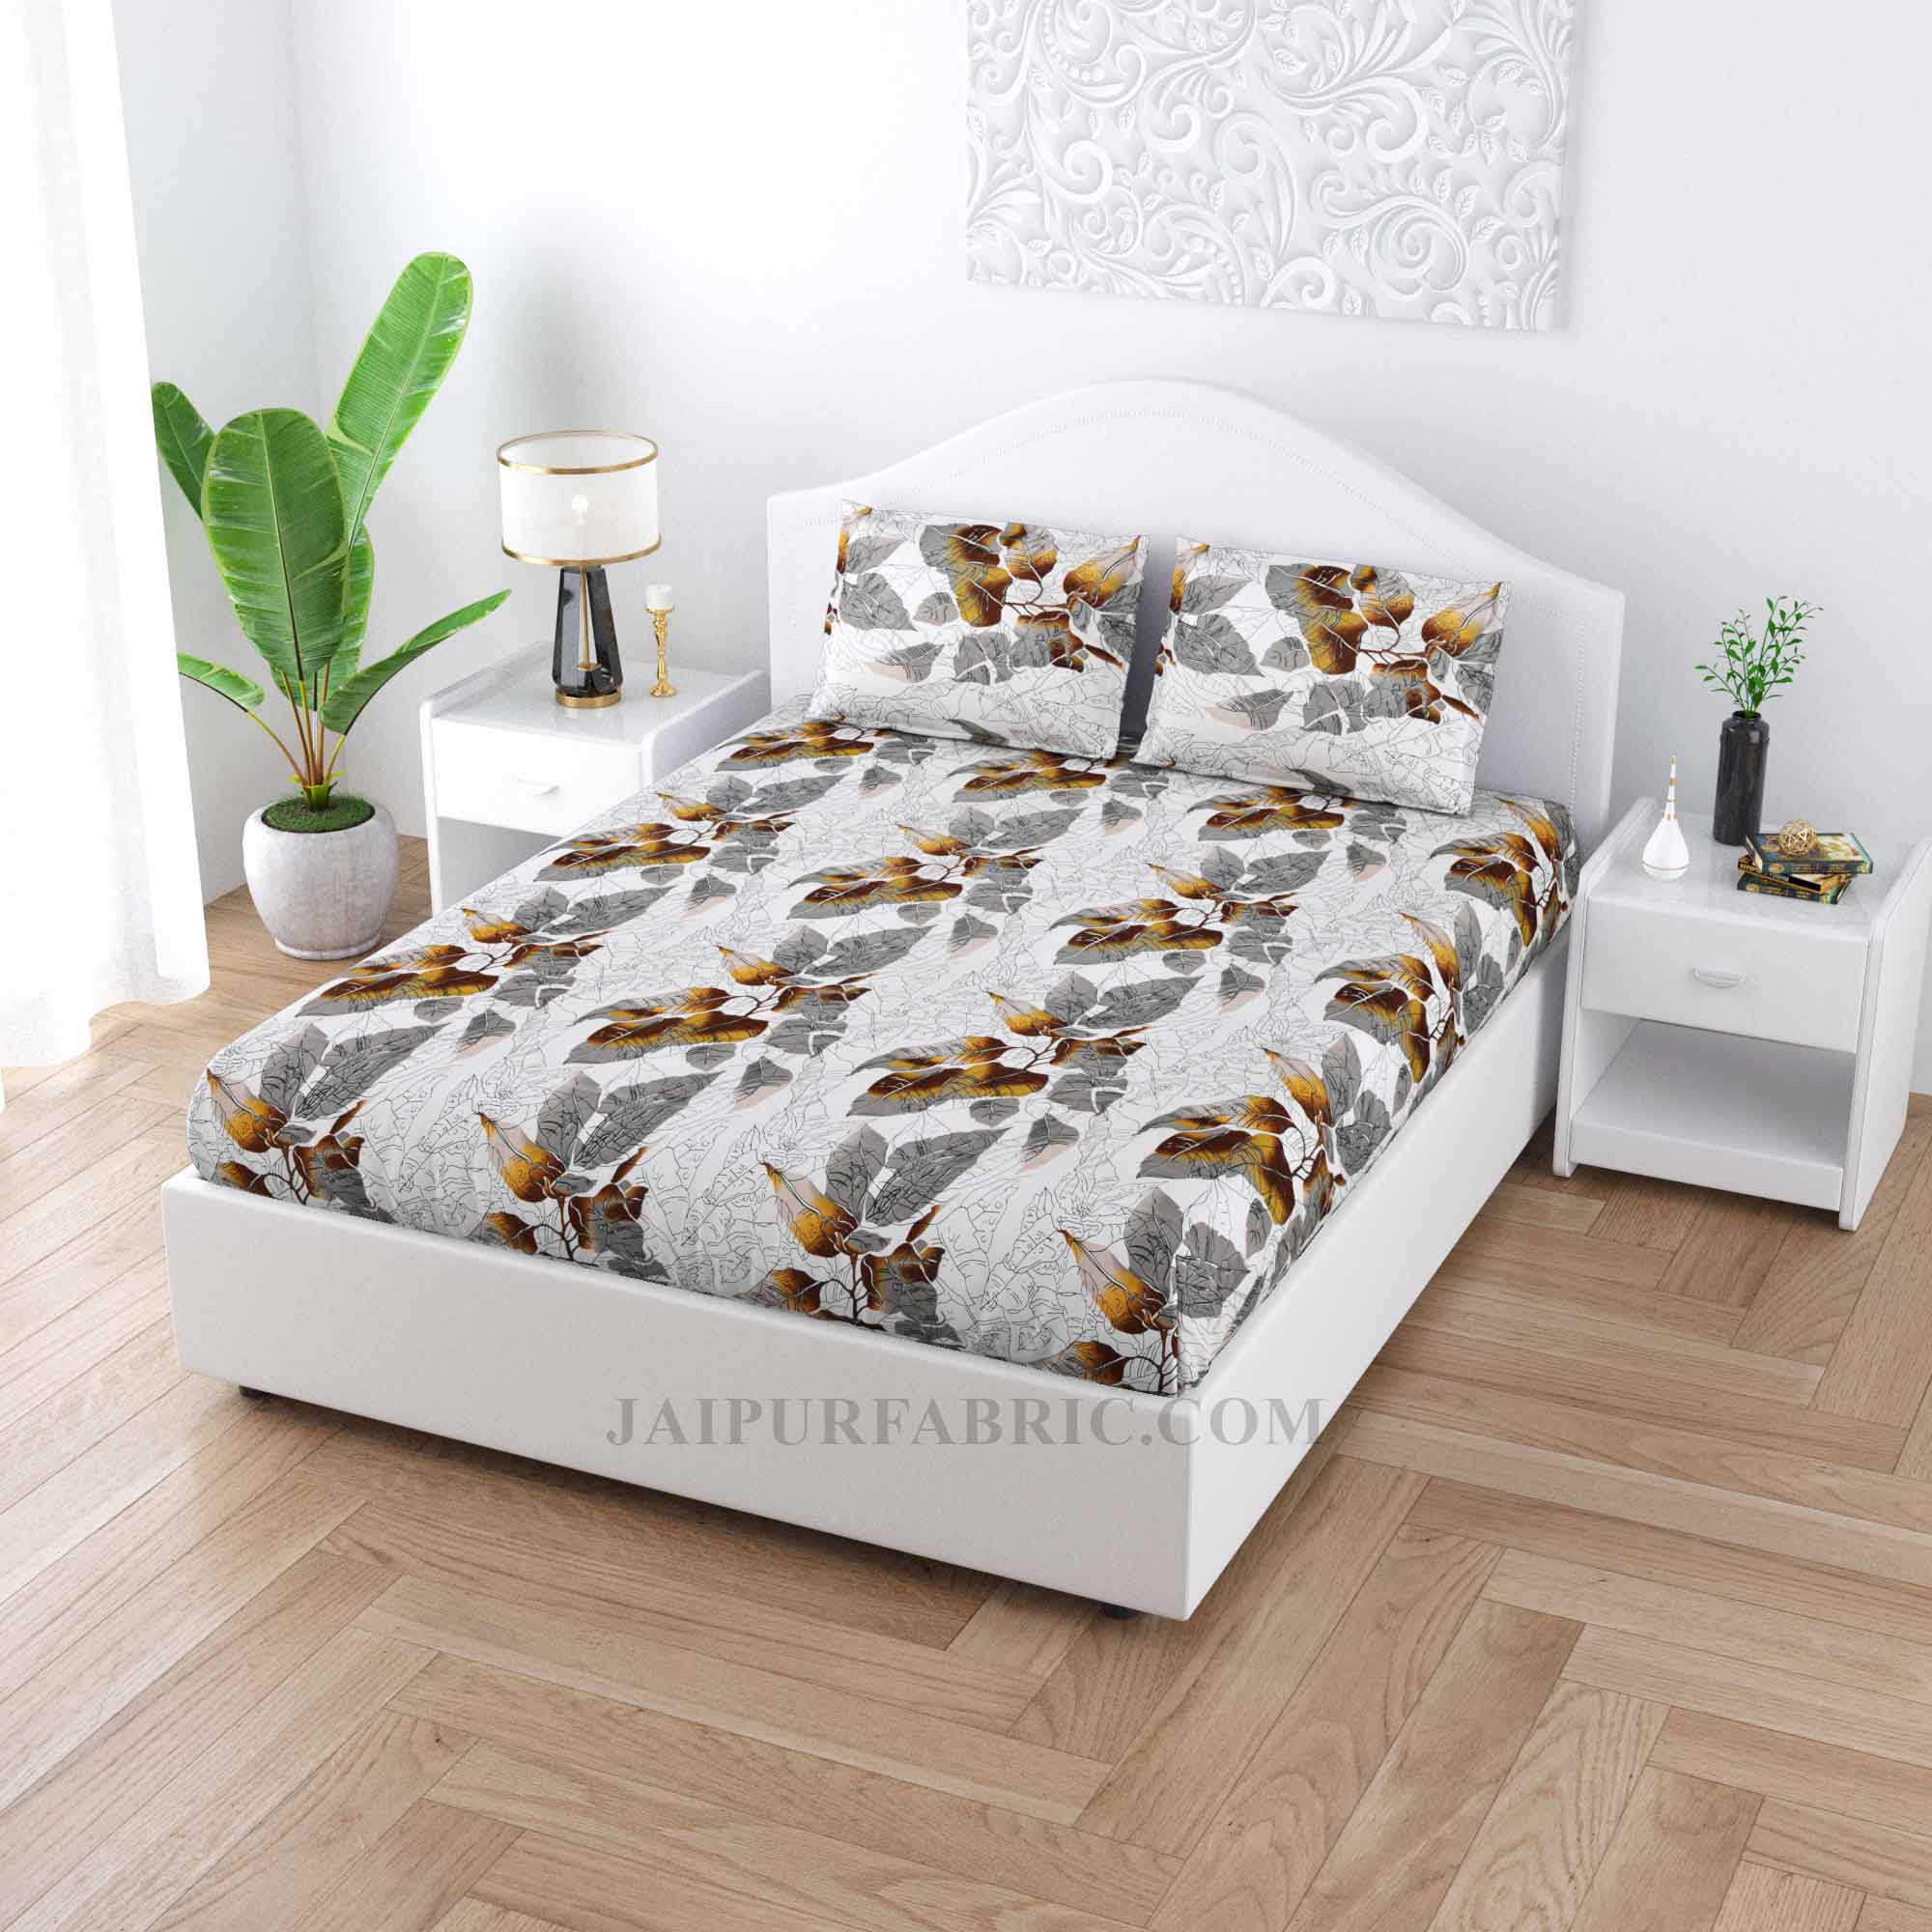 Leavespread White Cotton Double Bedsheet